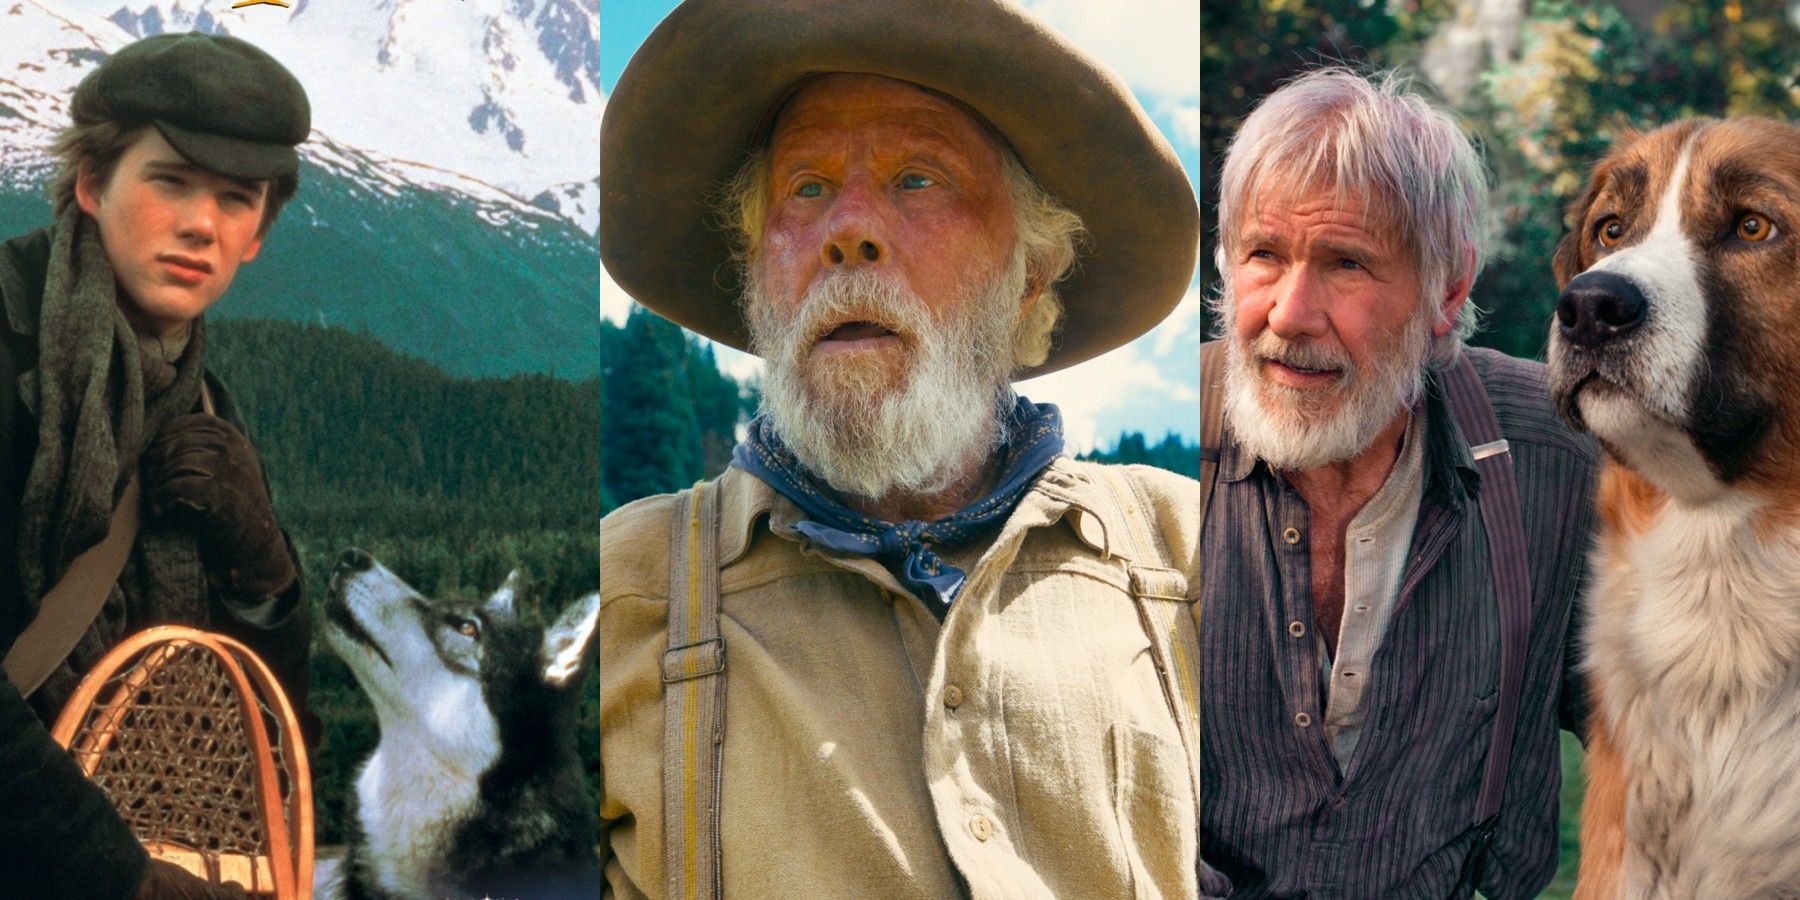 Split image: Scenes from cinematic adaptations of Jack London's White Fang, Old Gold Mountain, and The Call of the Wild.